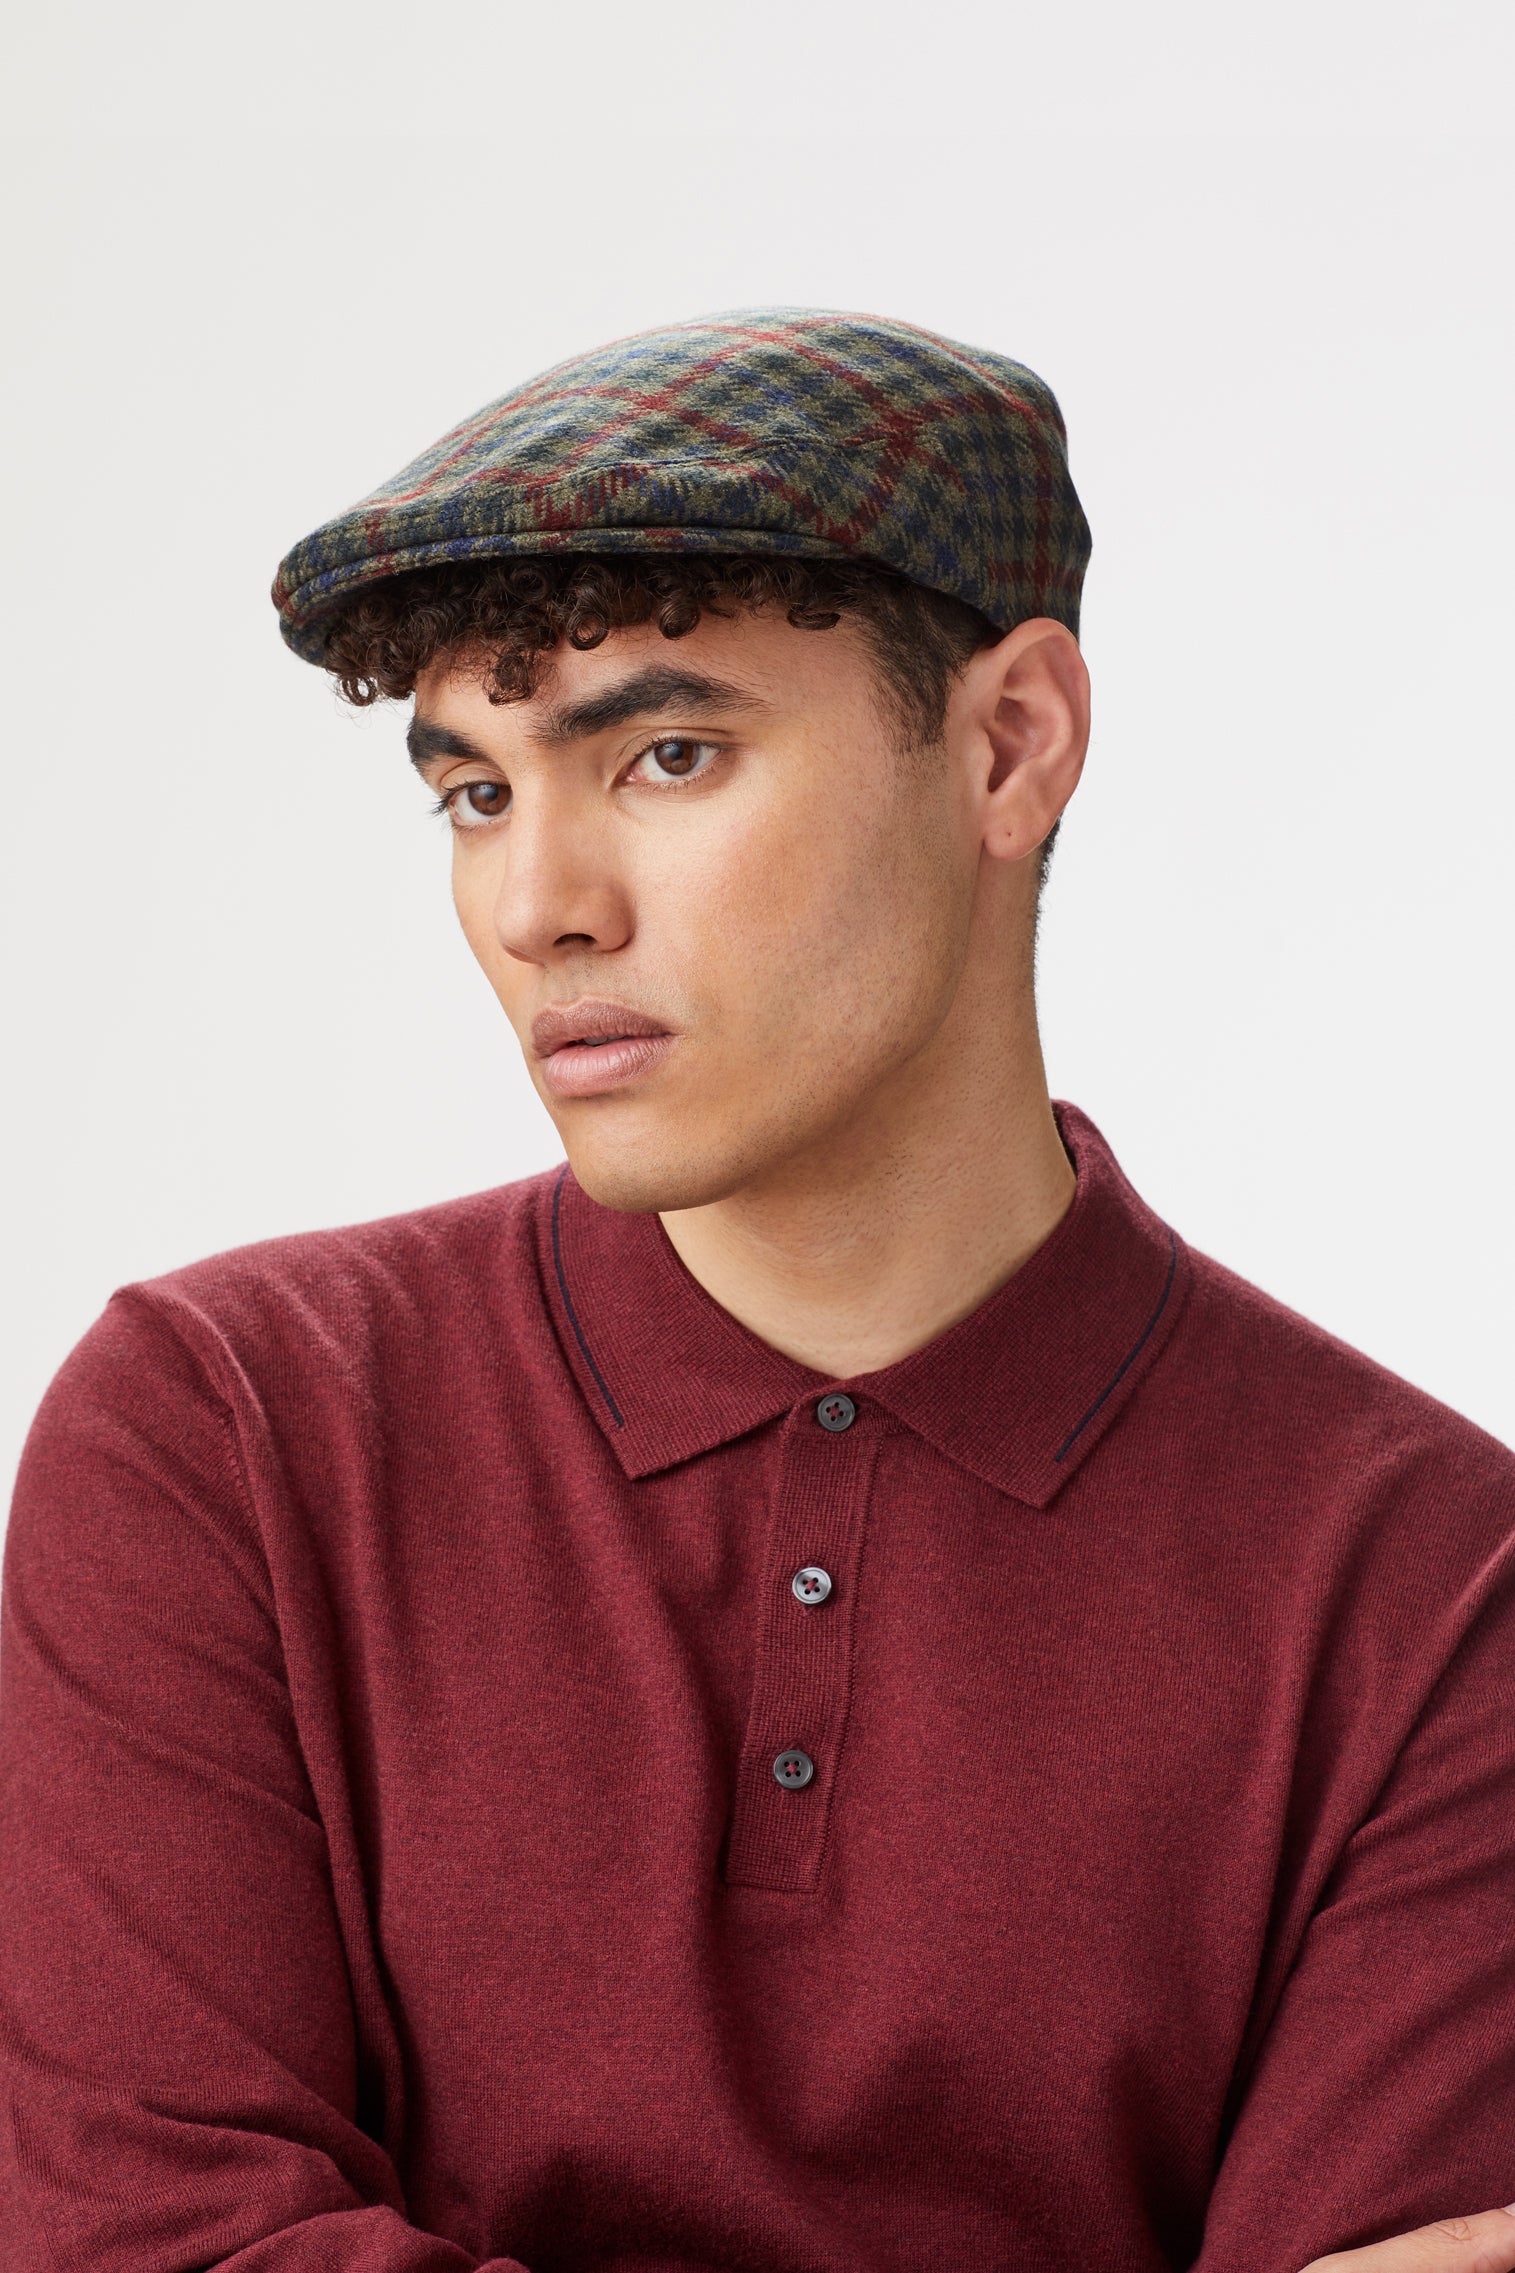 Gill Cashmere Flat Cap - Hats for Tall People - Lock & Co. Hatters London UK